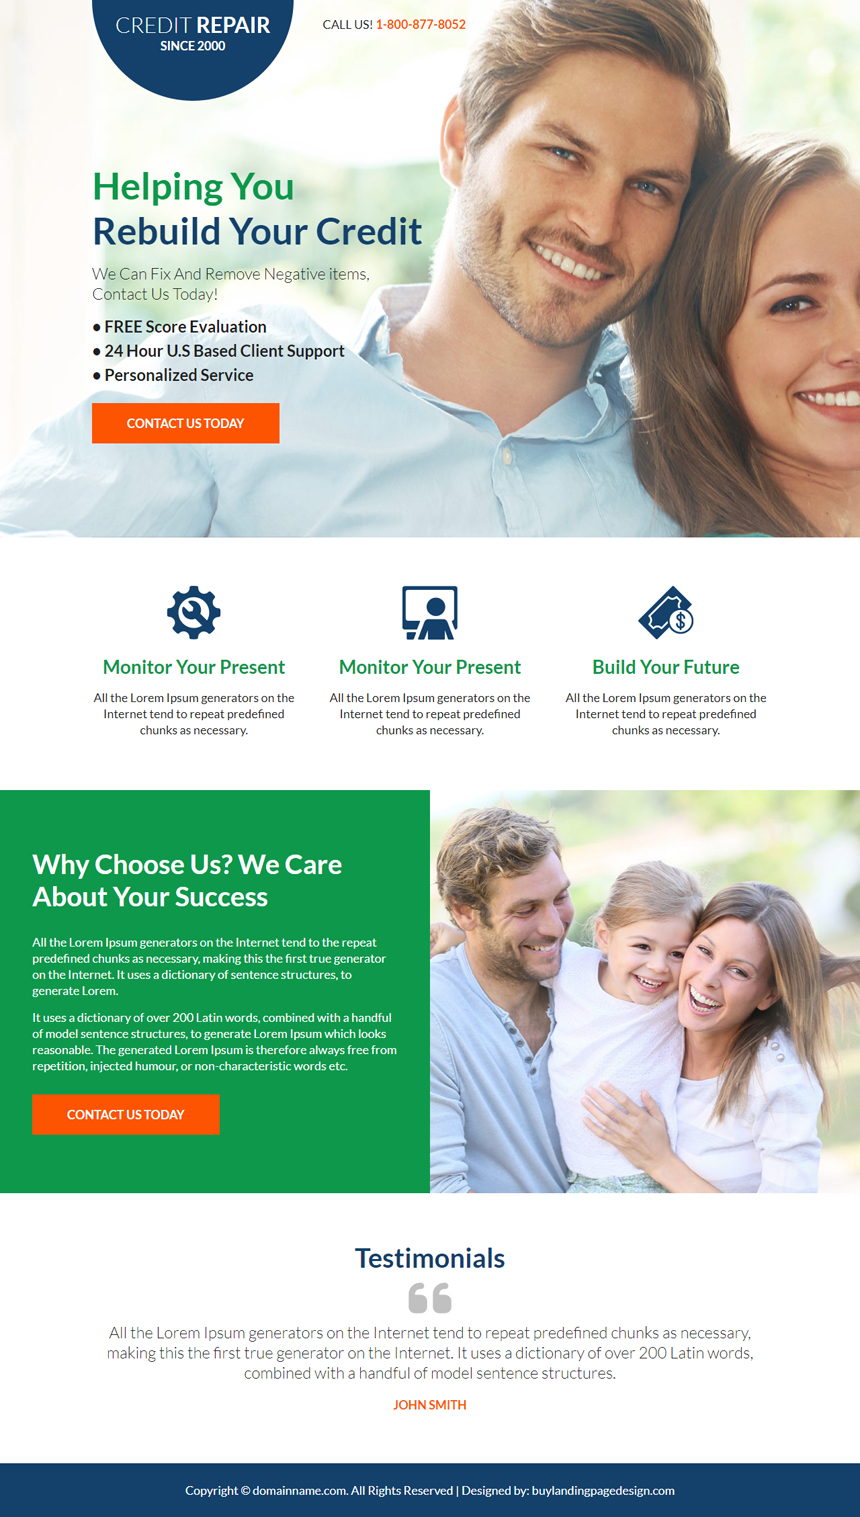 personalized credit repair service landing page